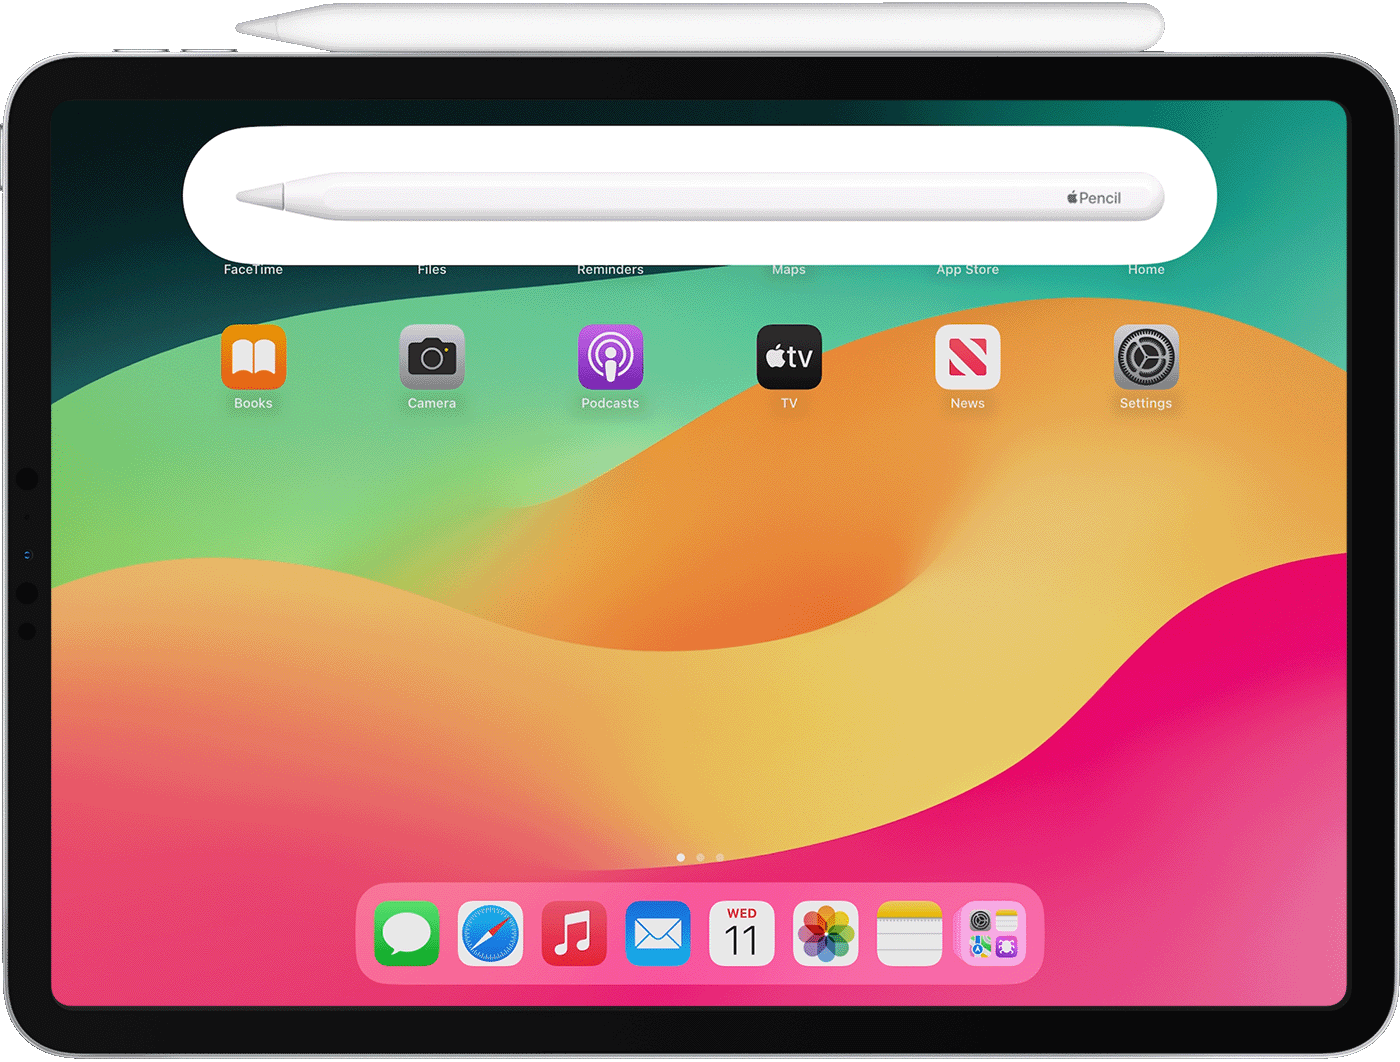 An iPad with a second generation Apple Pencil attached to it magnetically.